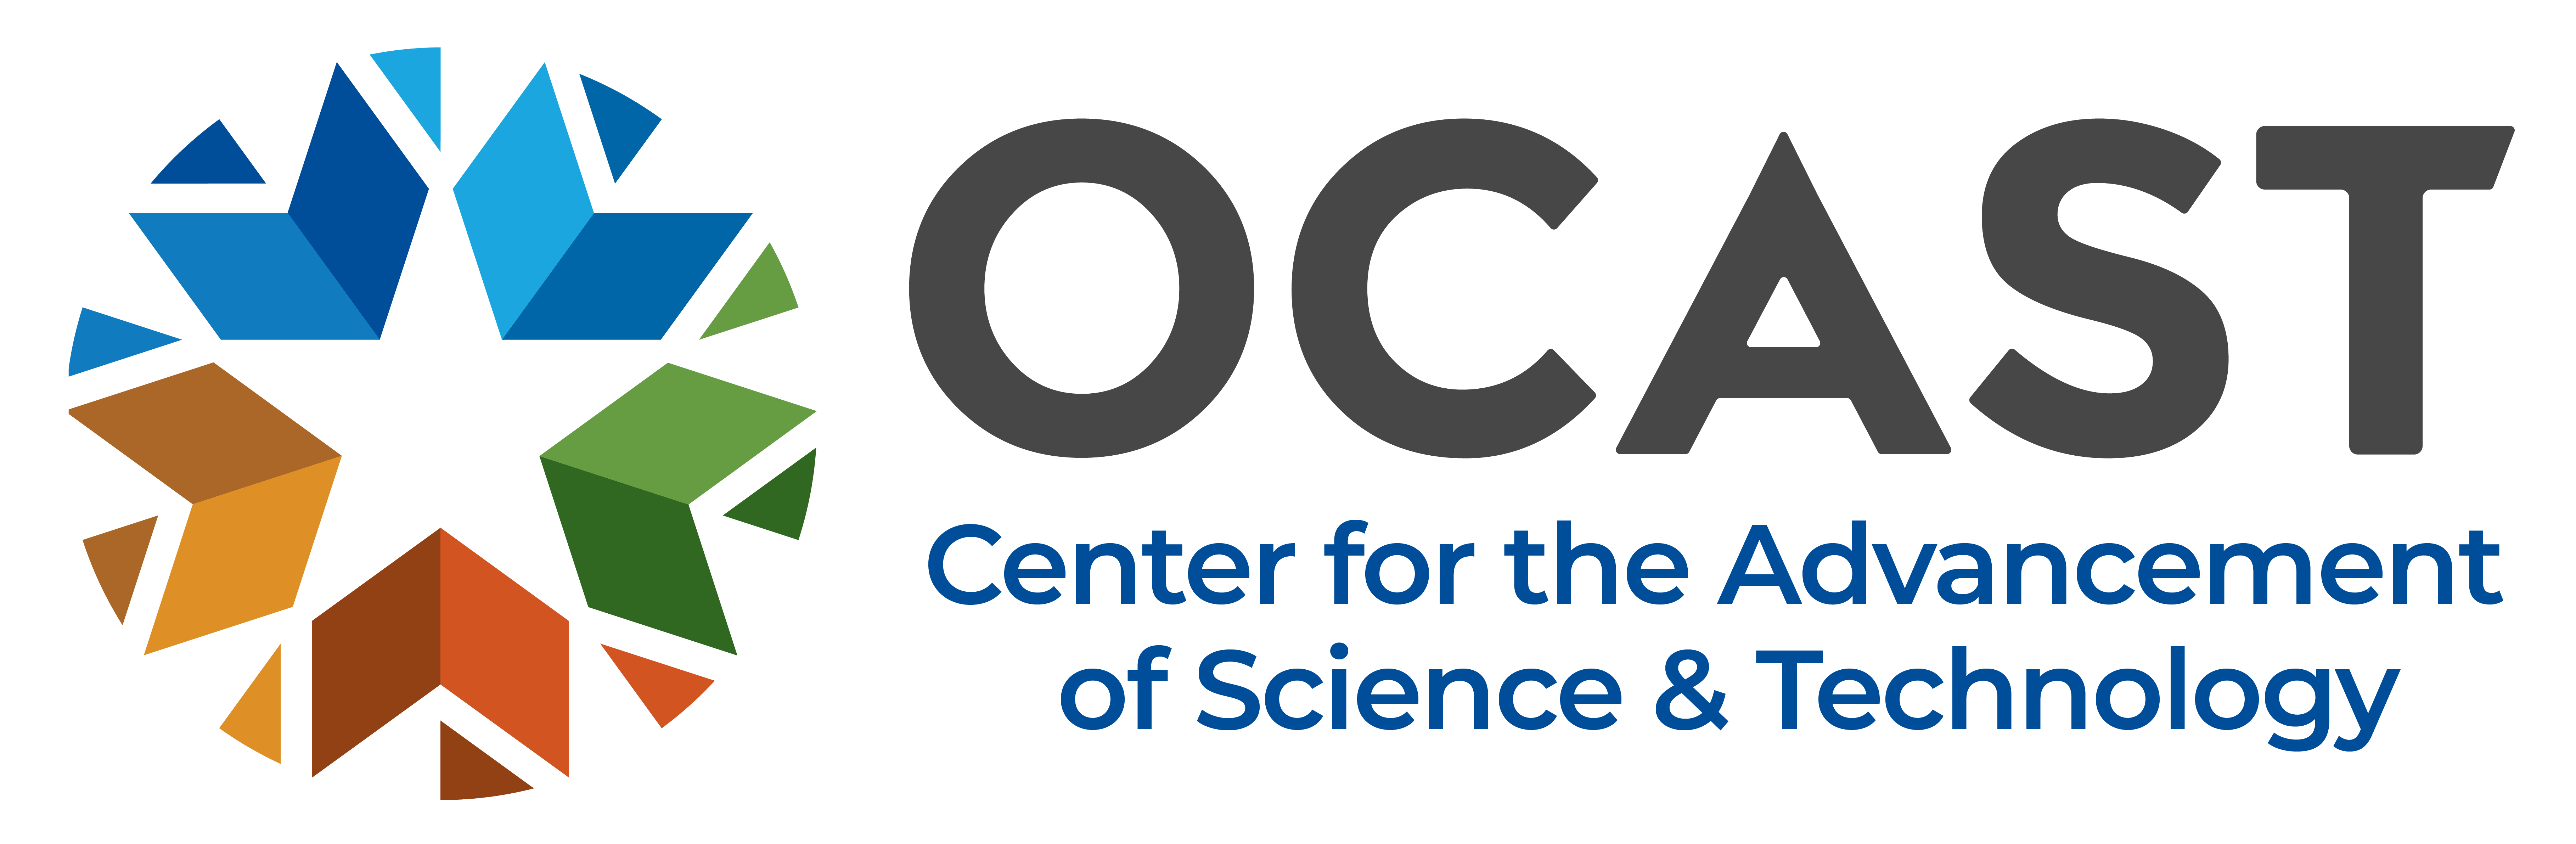 Imagine That logo adapted for OCAST